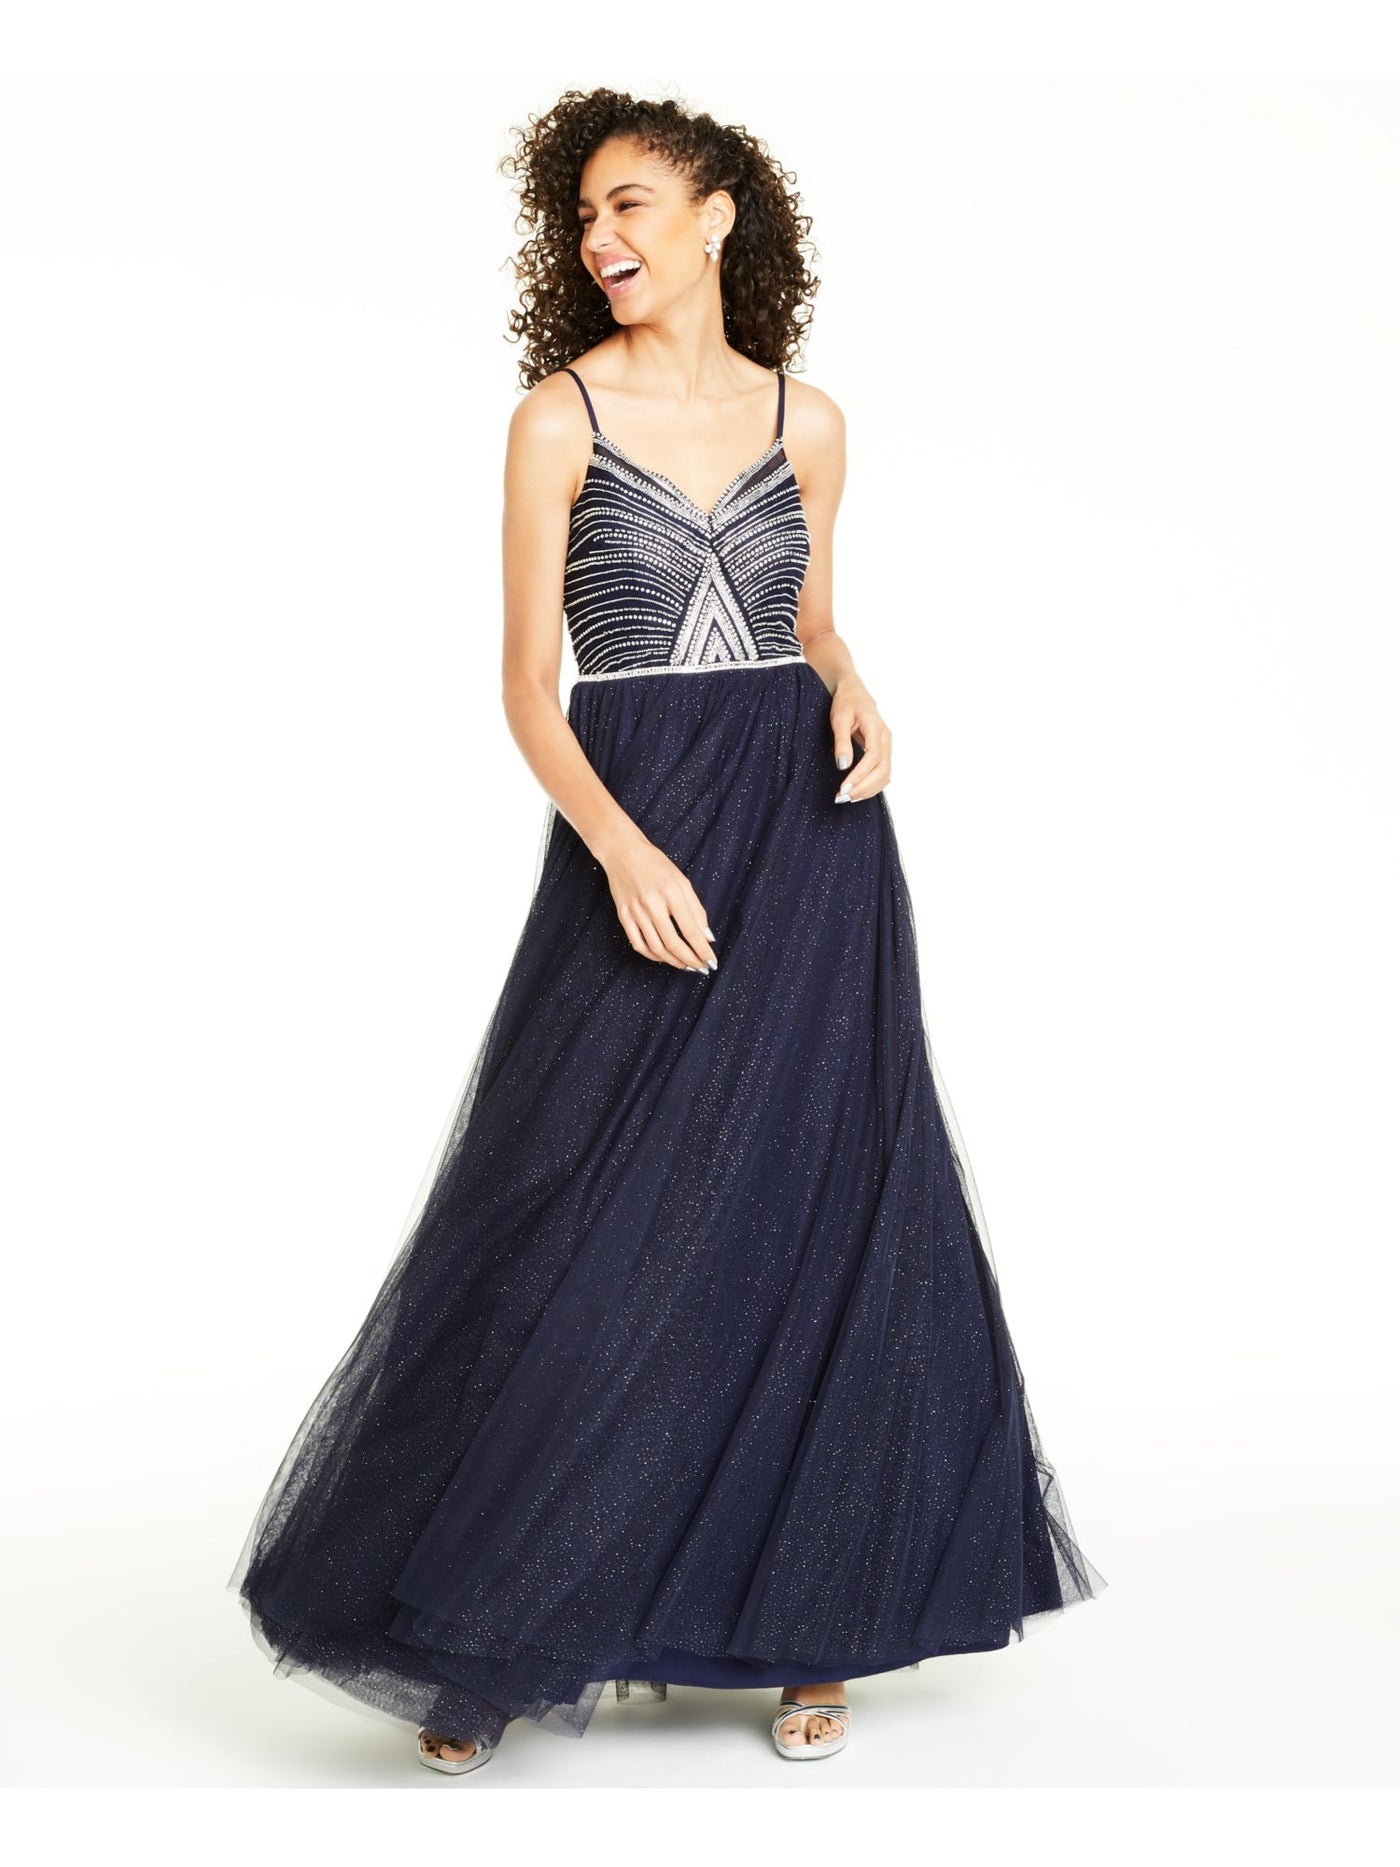 SAY YES TO THE PROM Womens Navy Glitter Sheer Spaghetti Strap Sweetheart Neckline Full-Length Formal Fit + Flare Dress Juniors 5